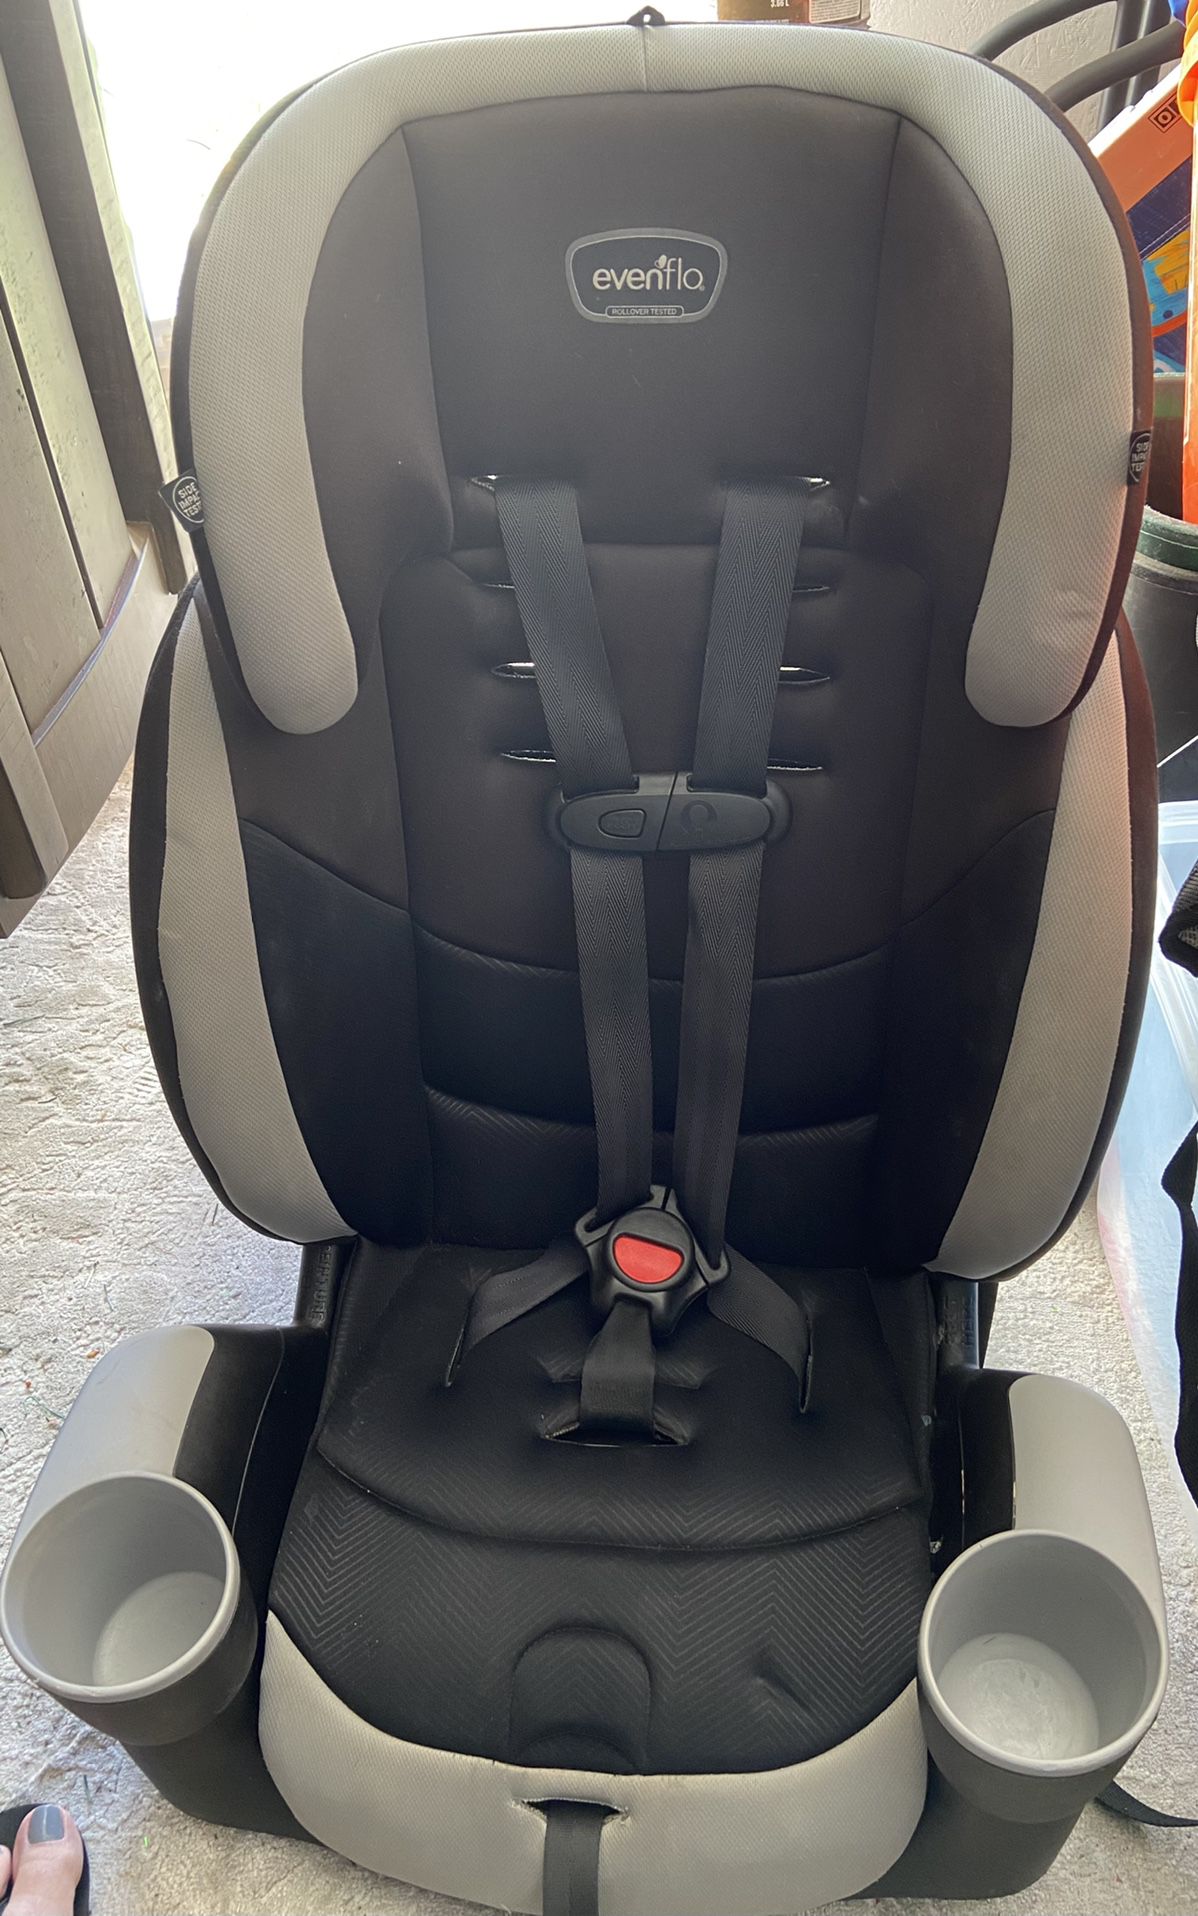 Evenflo Booster Car Seat 💺 